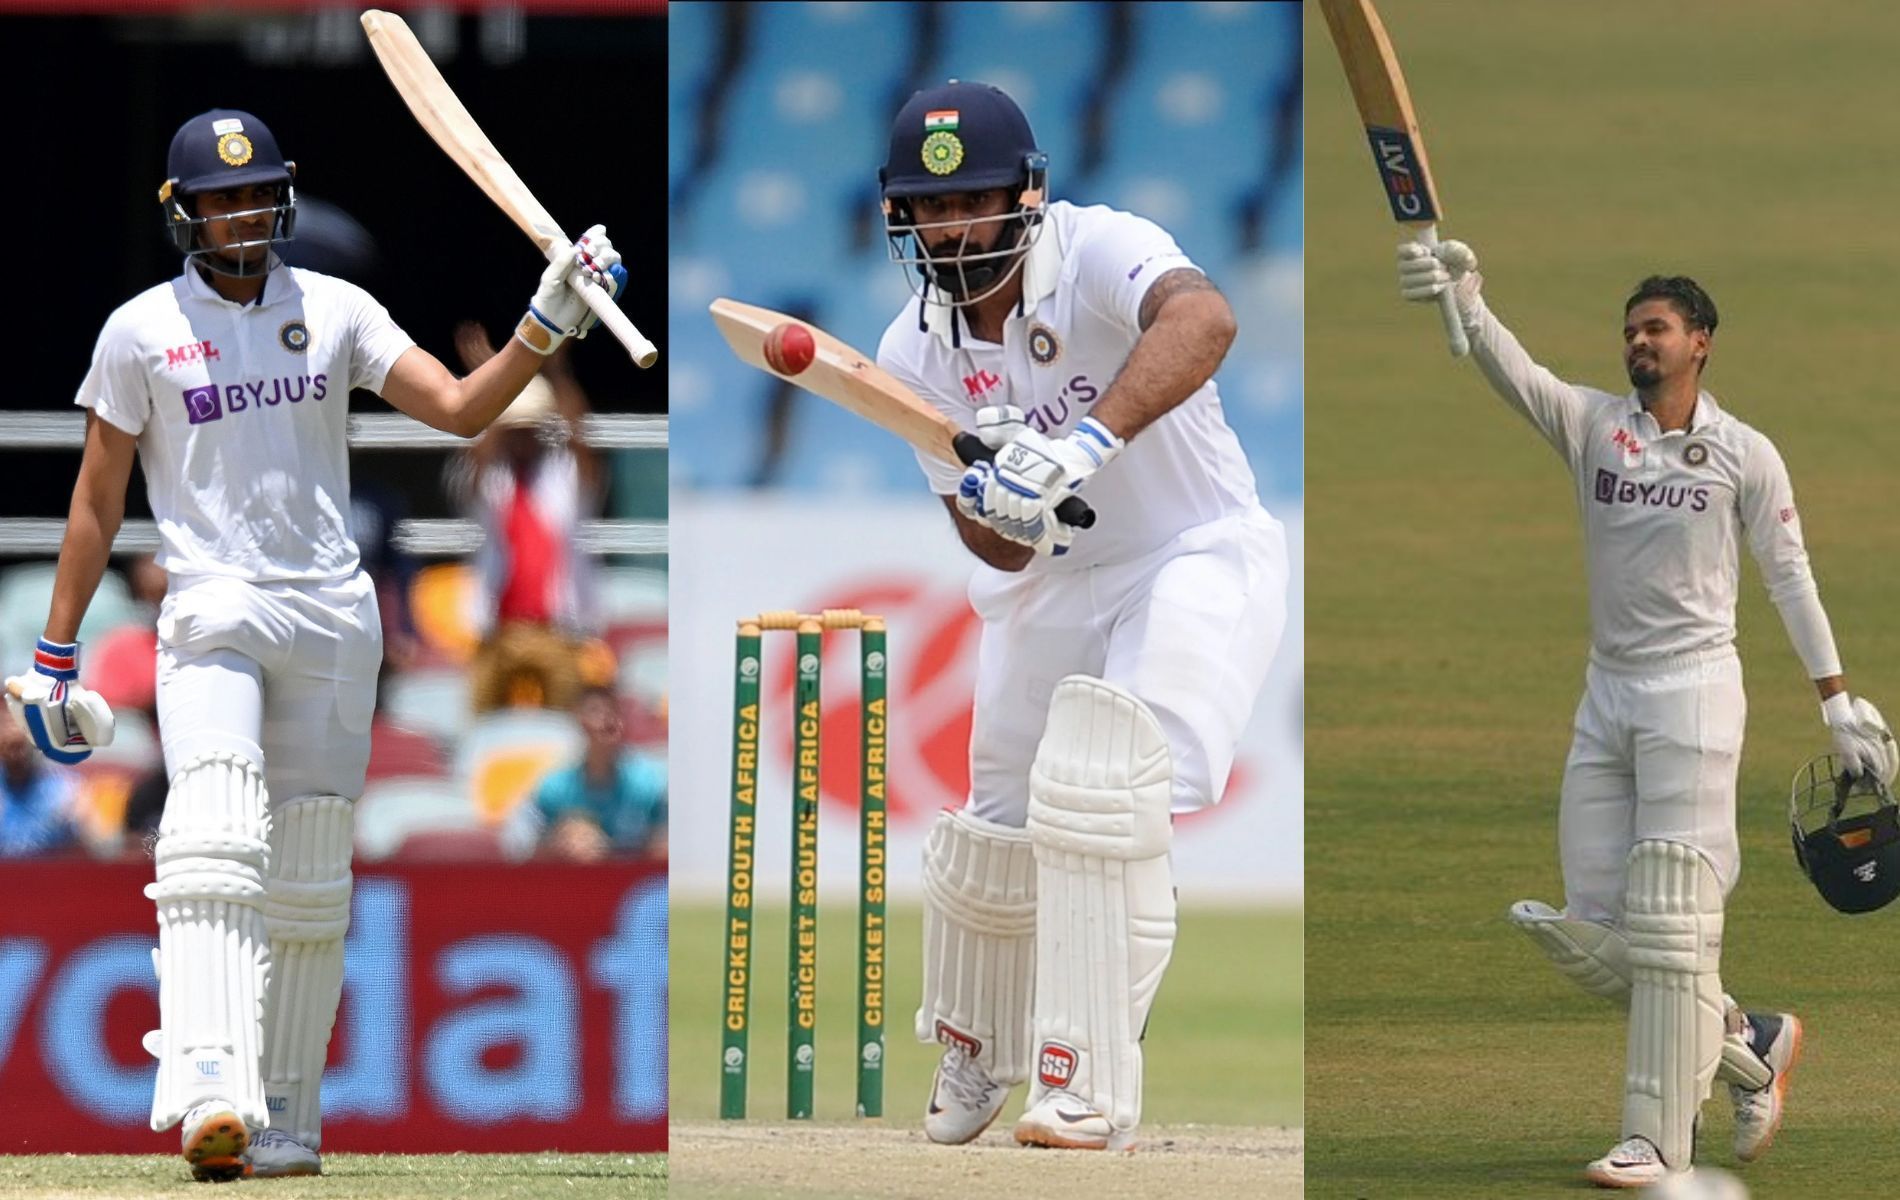 India have to pick two new players for their middle order for the Sri Lanka Tests.